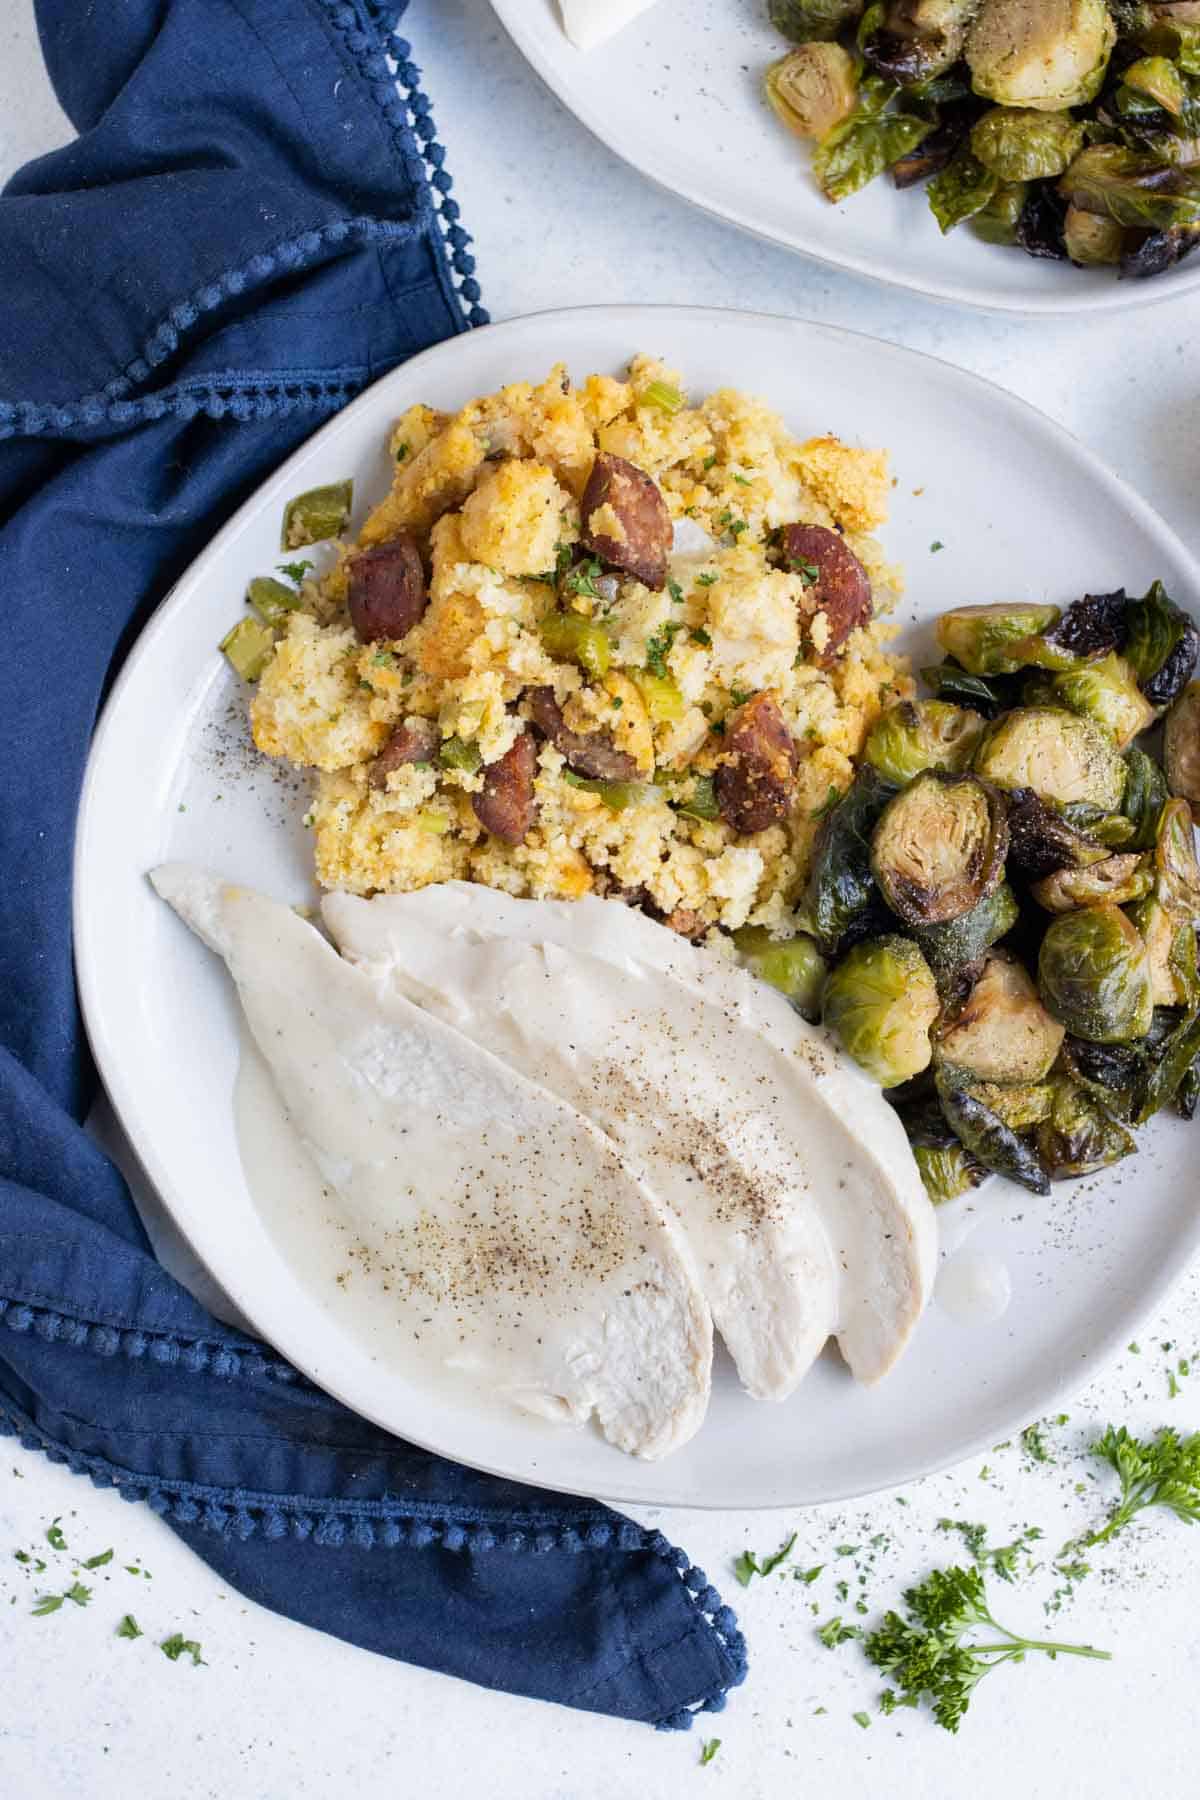 You can serve cornbread dressing with turkey at Thanksgiving.